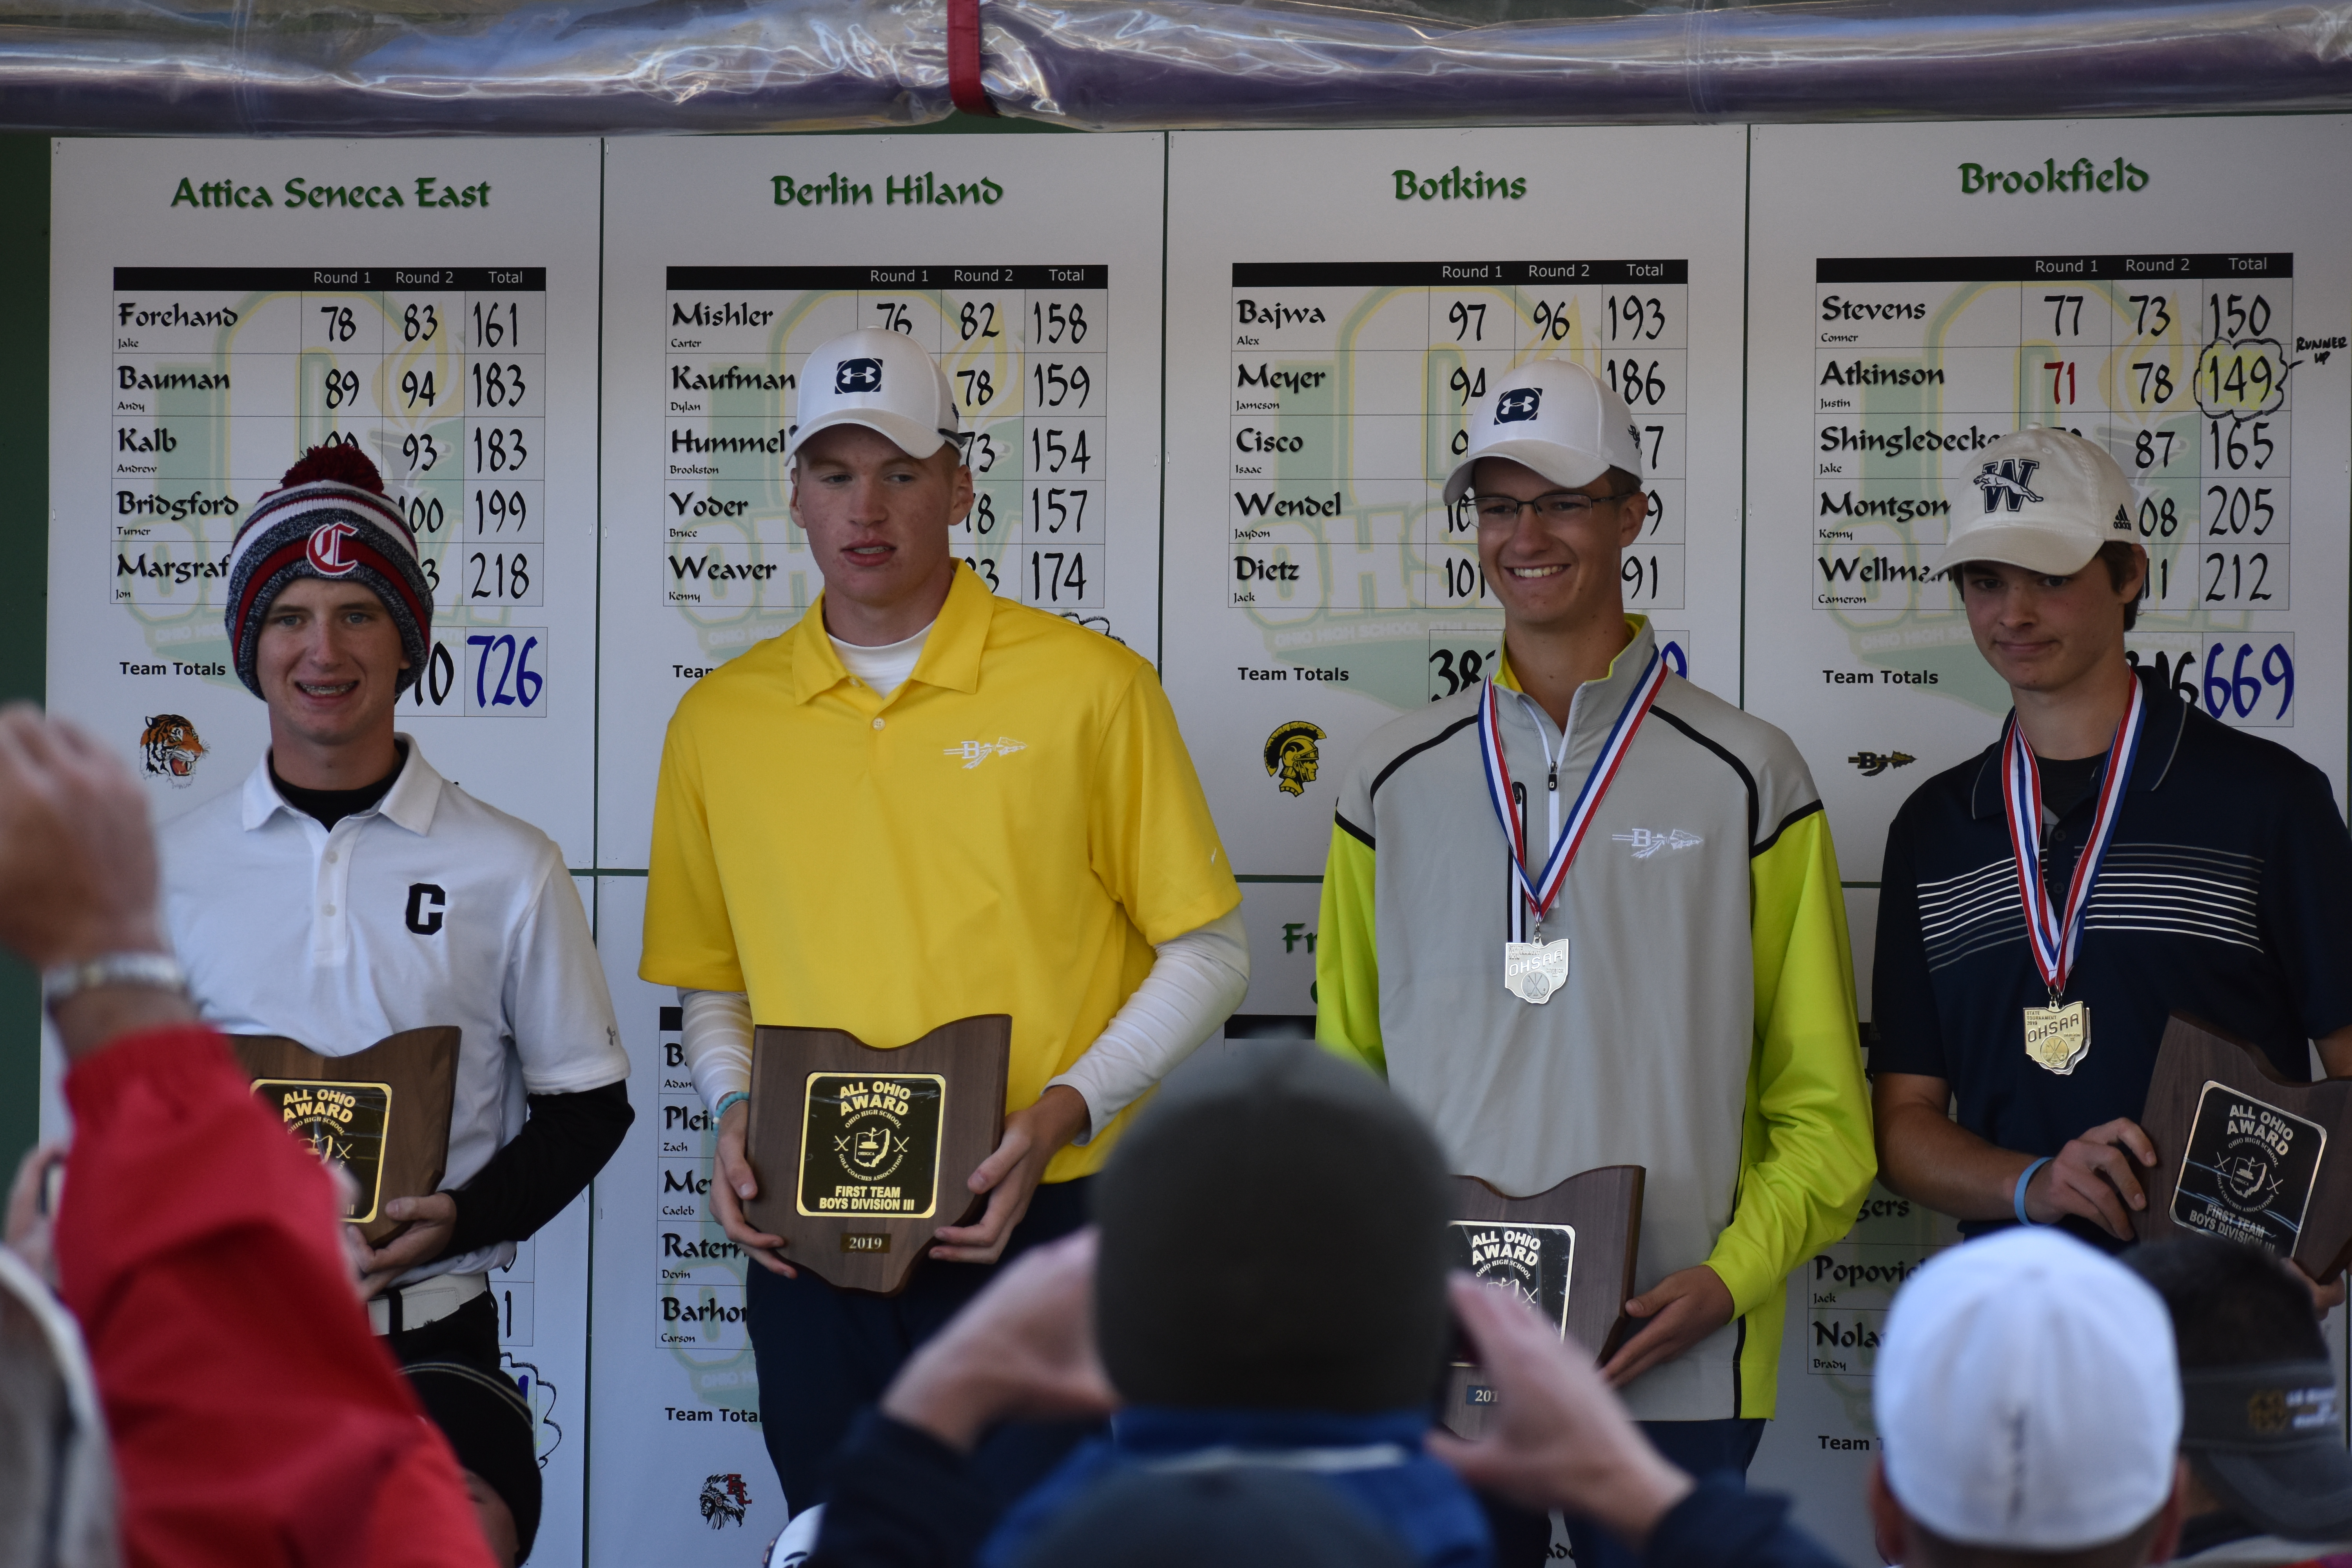 Conner Stevens, second from left, and Justin Atkinson, second from right, were named to the First Team All State Golf Team.